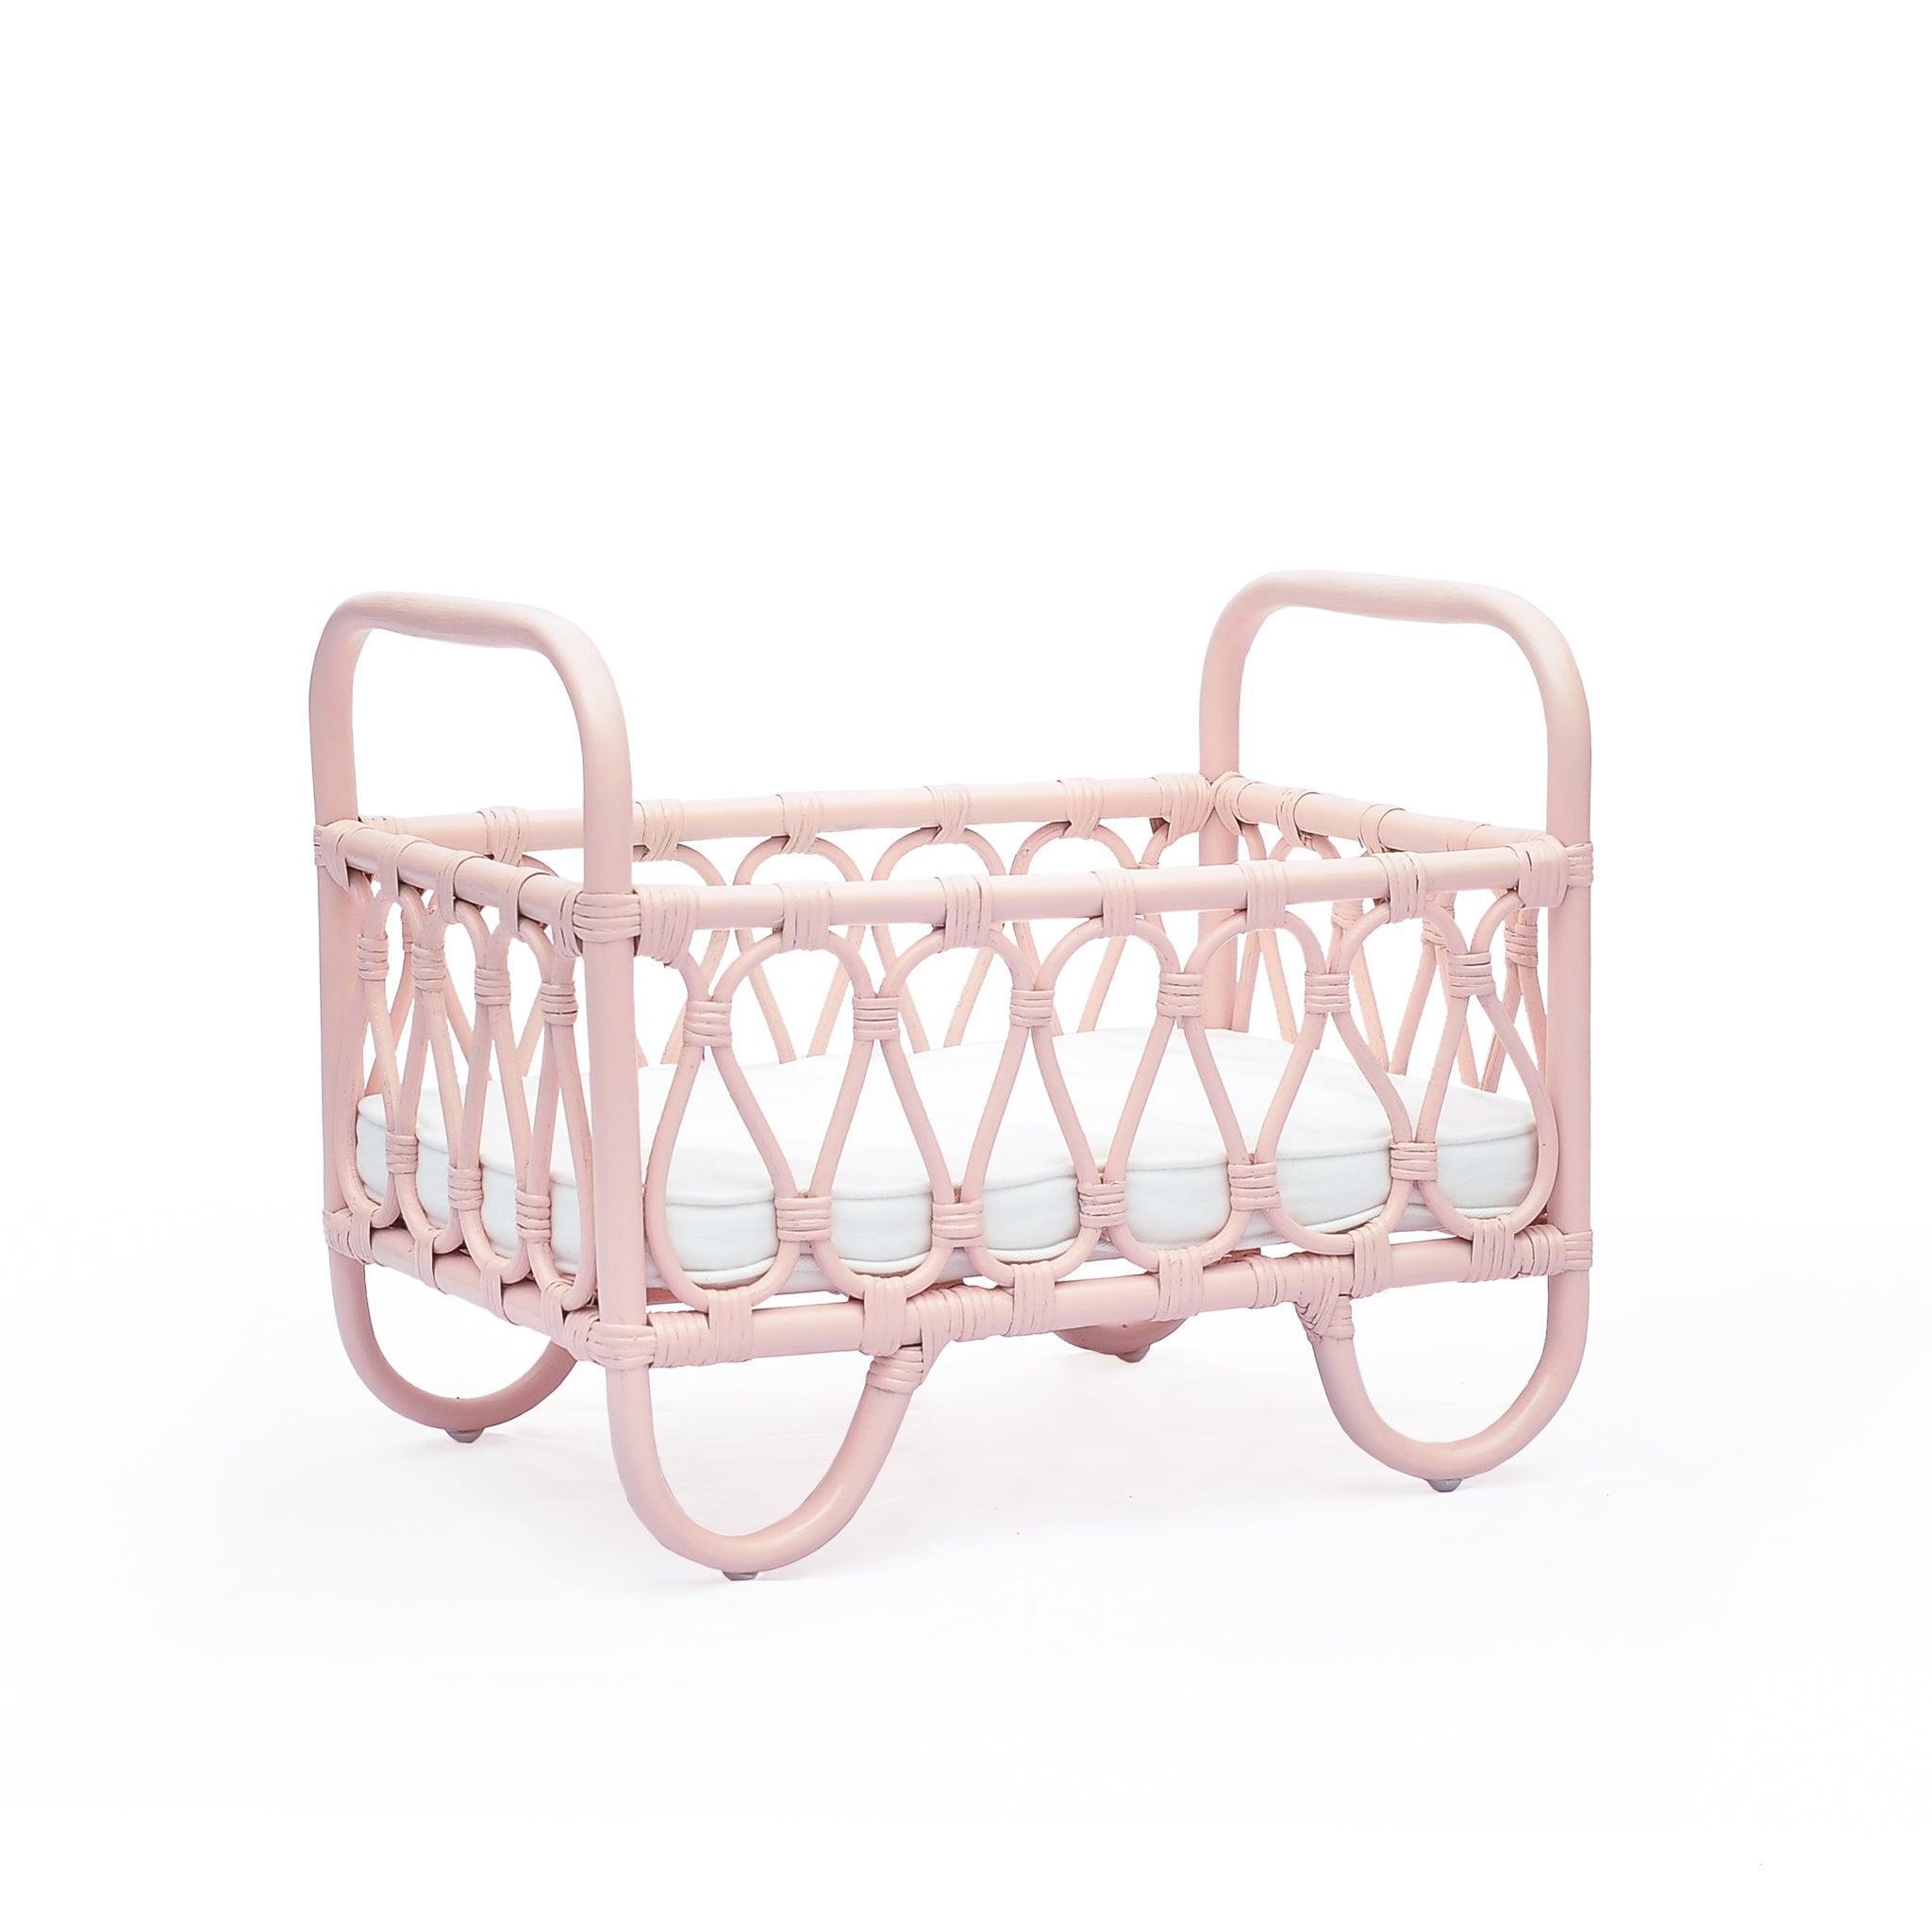 Ellie Petite Doll Crib - Why and Whale